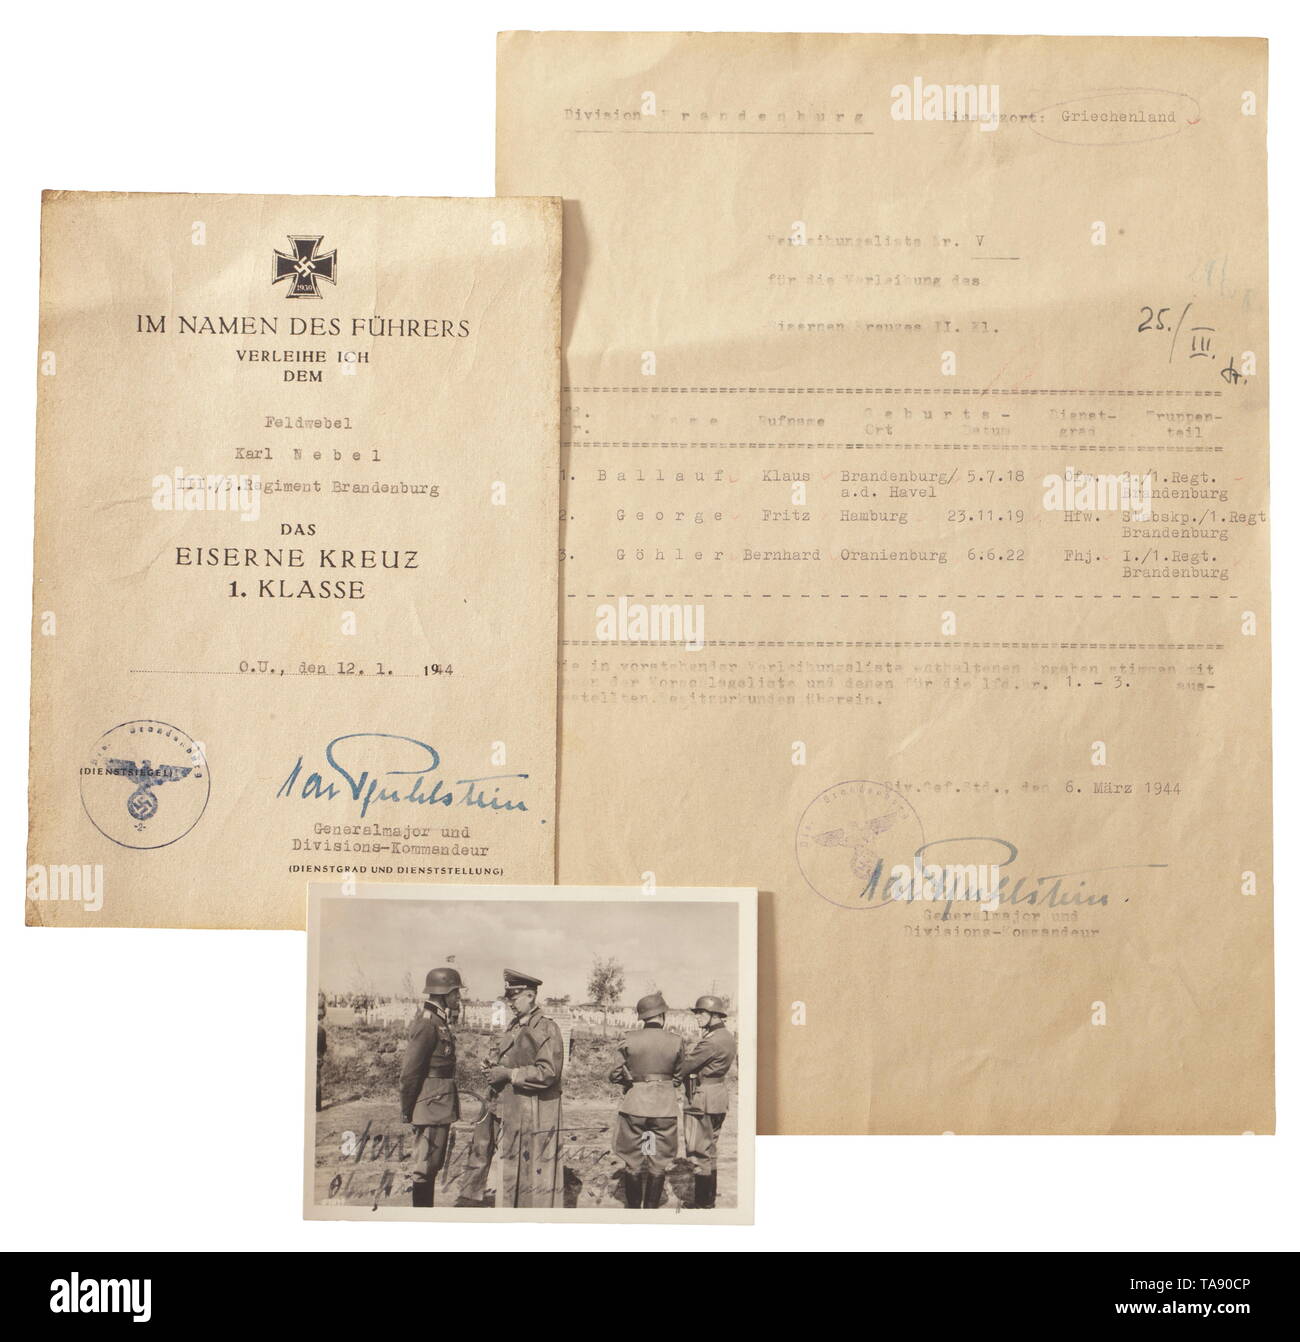 Division 'Brandenburg' Three documents and a photograph. Award document for the Iron Cross 1st Class to Feldwebel Karl Nebel 'III./3.Regiment Brandenburg' issued 12 January 1944 with original signature of Generalmajor von Pfuhlstein. Award listing for the Iron Cross 2nd Class, (tr.) 'Operational Area Greece' dated 6 March 1944, with three 'Brandenburgers' listed. Photo of von Pfuhlstein as an Oberst (Colonel) and regimental commander, signed on the front, reverse labelled, vestiges of adhesive. Career soldier Alexander von Pfuhlstein (1889 - 1976) assumed command of the 'Br, Editorial-Use-Only Stock Photo